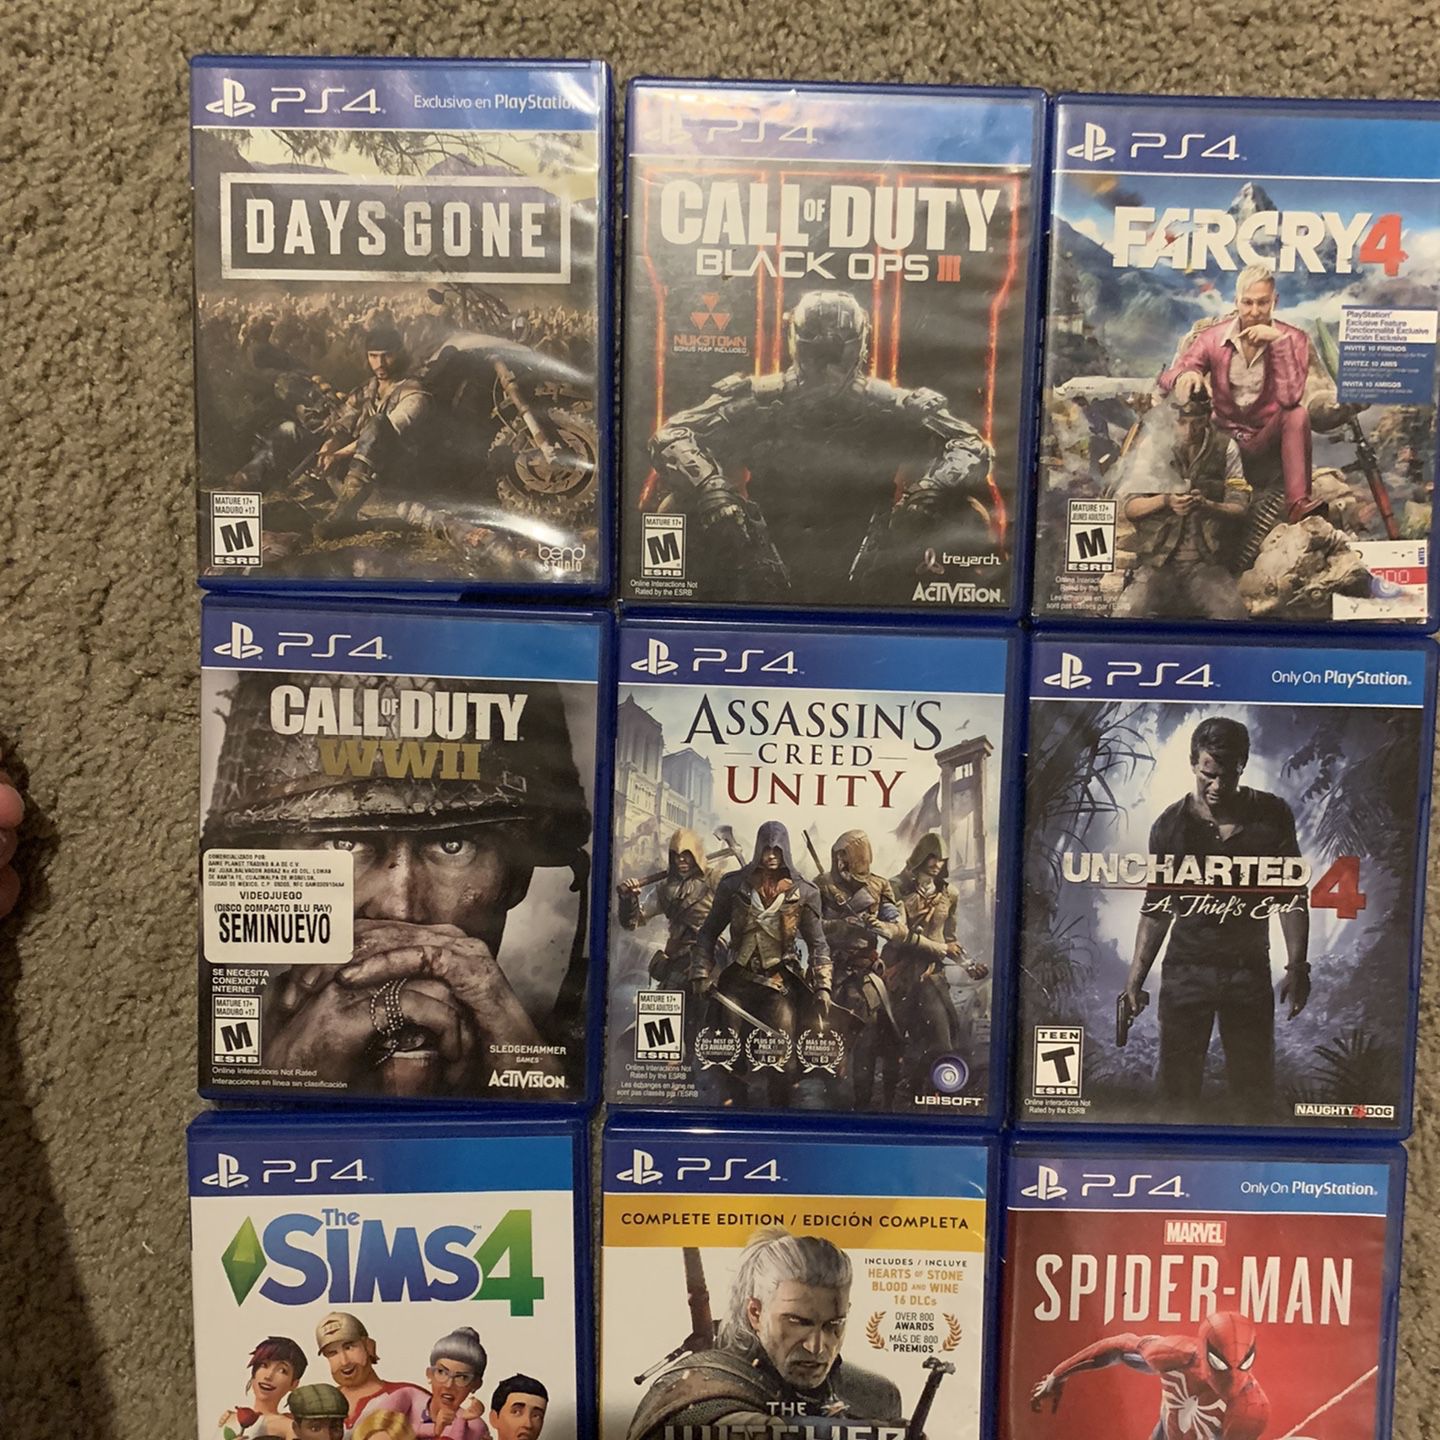 Brand New In Package Call Of Duty WW2 PS4 Game for Sale in Manchester, CT -  OfferUp